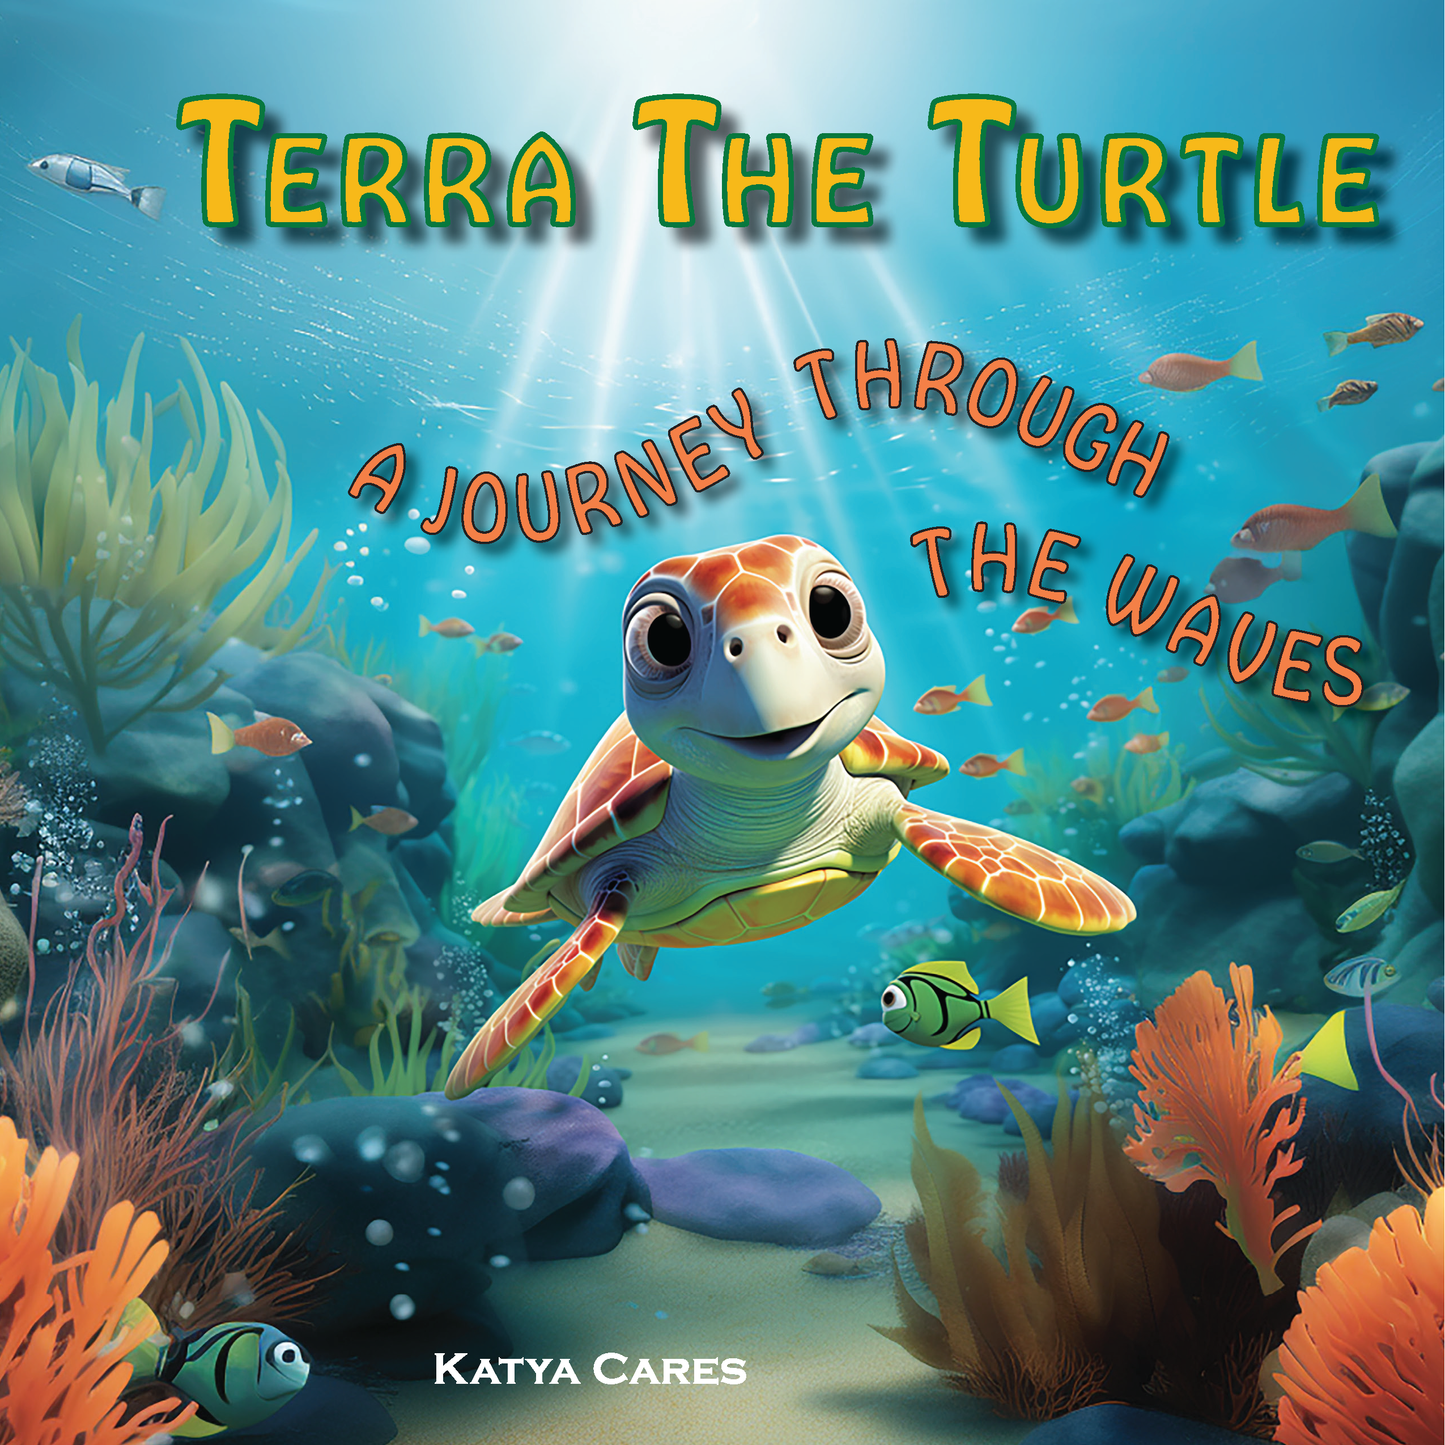 Terra The Turtle: A Journey Through The Waves! E-book